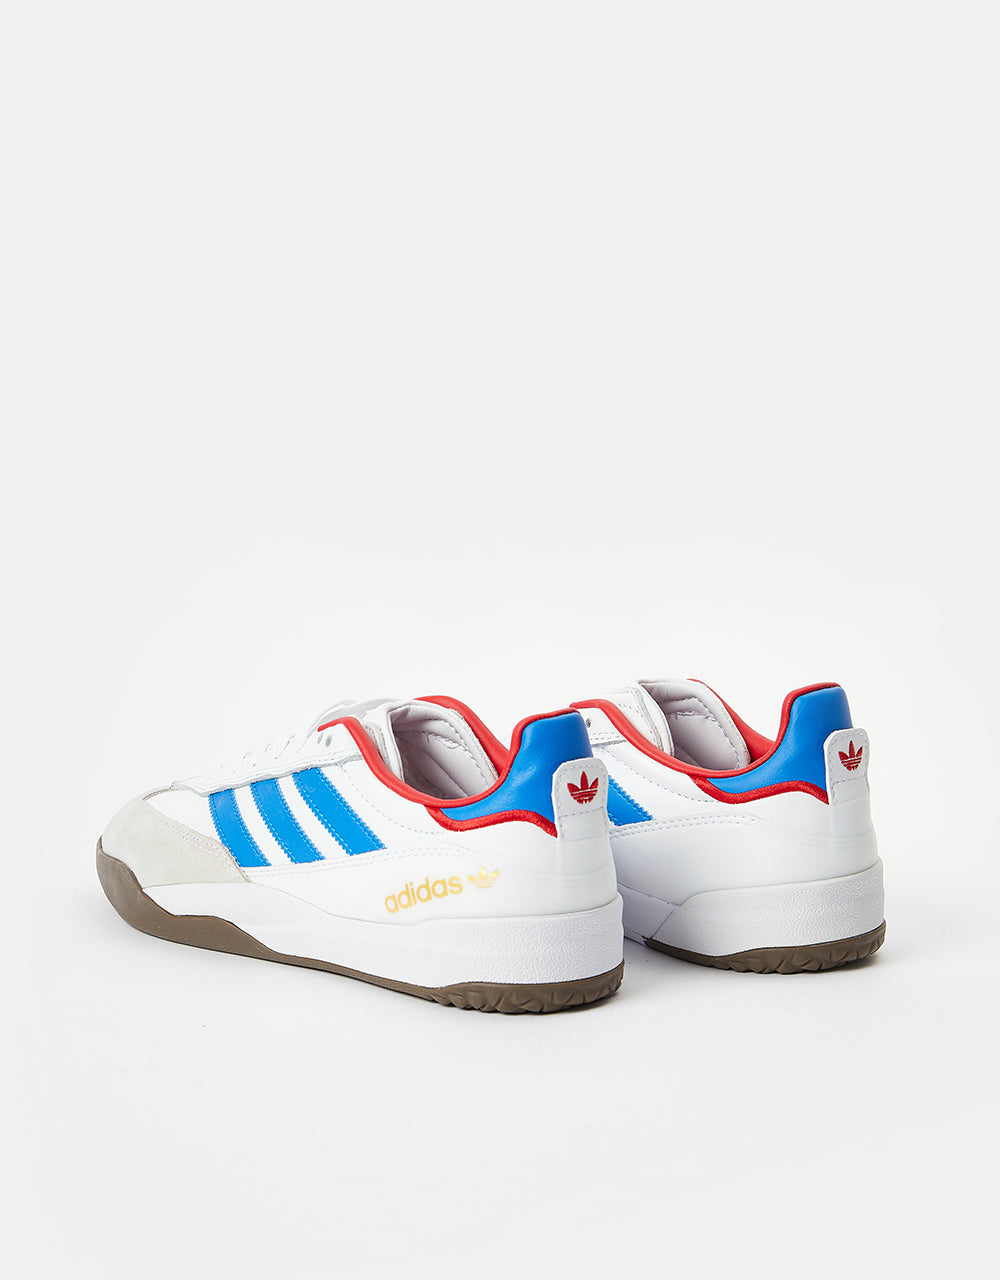 adidas Copa Nationale Skate Shoes - White/Bluebird/Scarlet – Route One